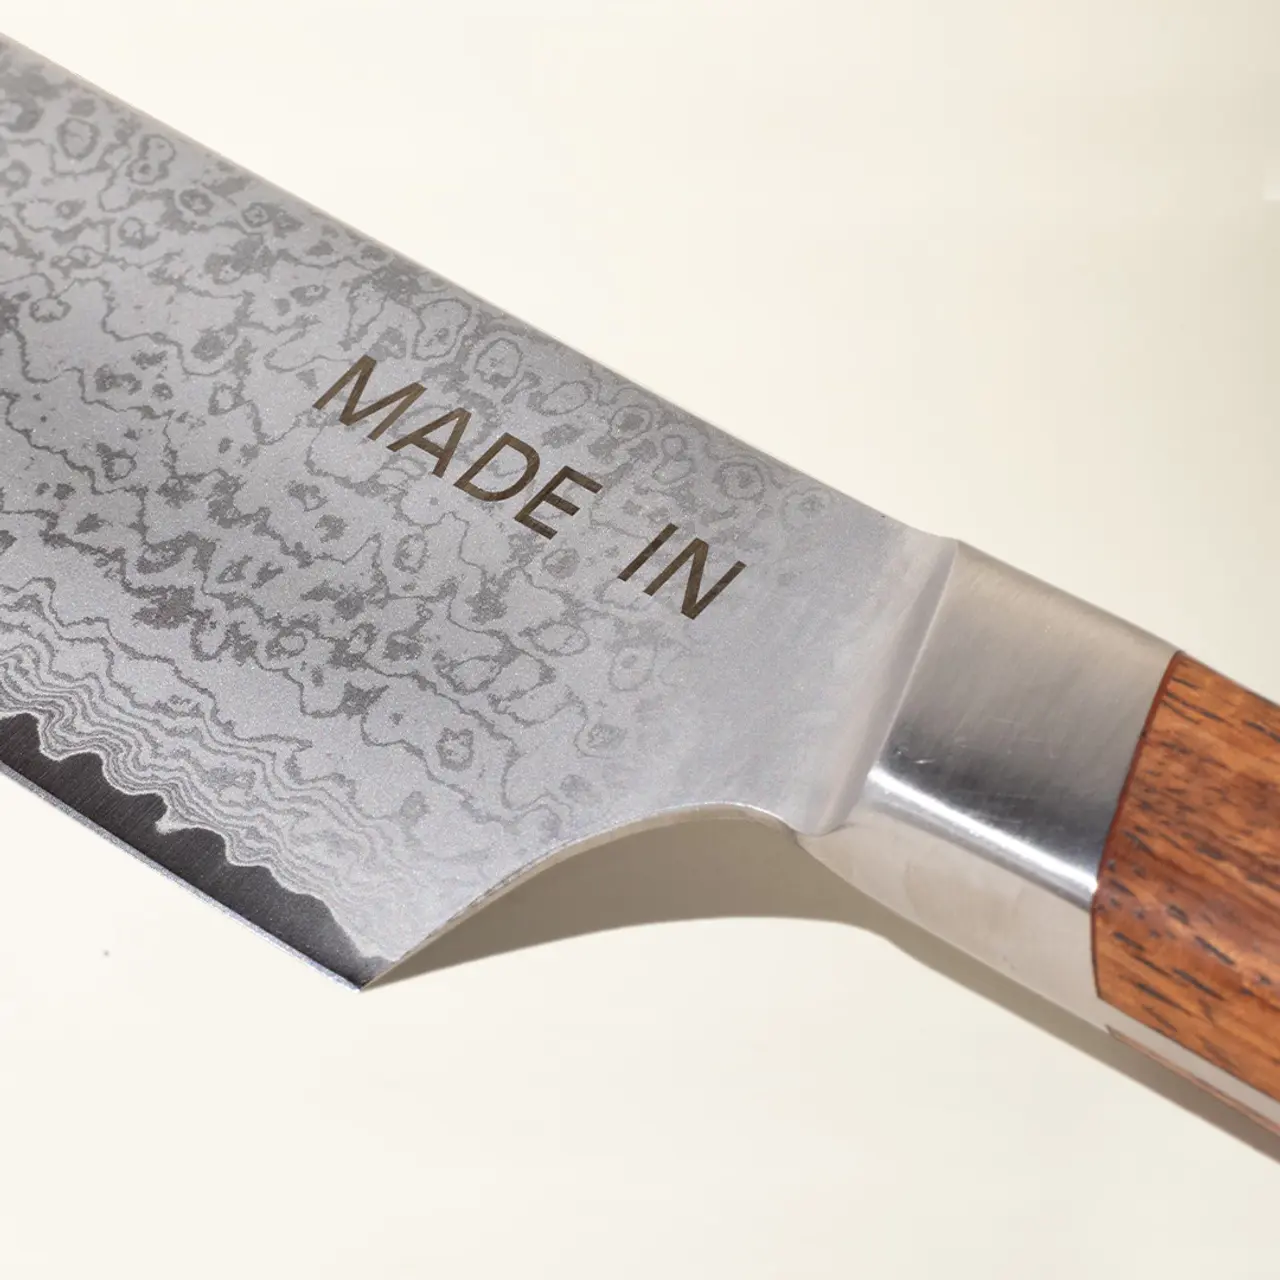 A close-up of a knife blade with a "MADE IN" inscription and a patterned, Damascus-style design near the cutting edge, transitioning to a polished steel near the bolster and a wooden handle.